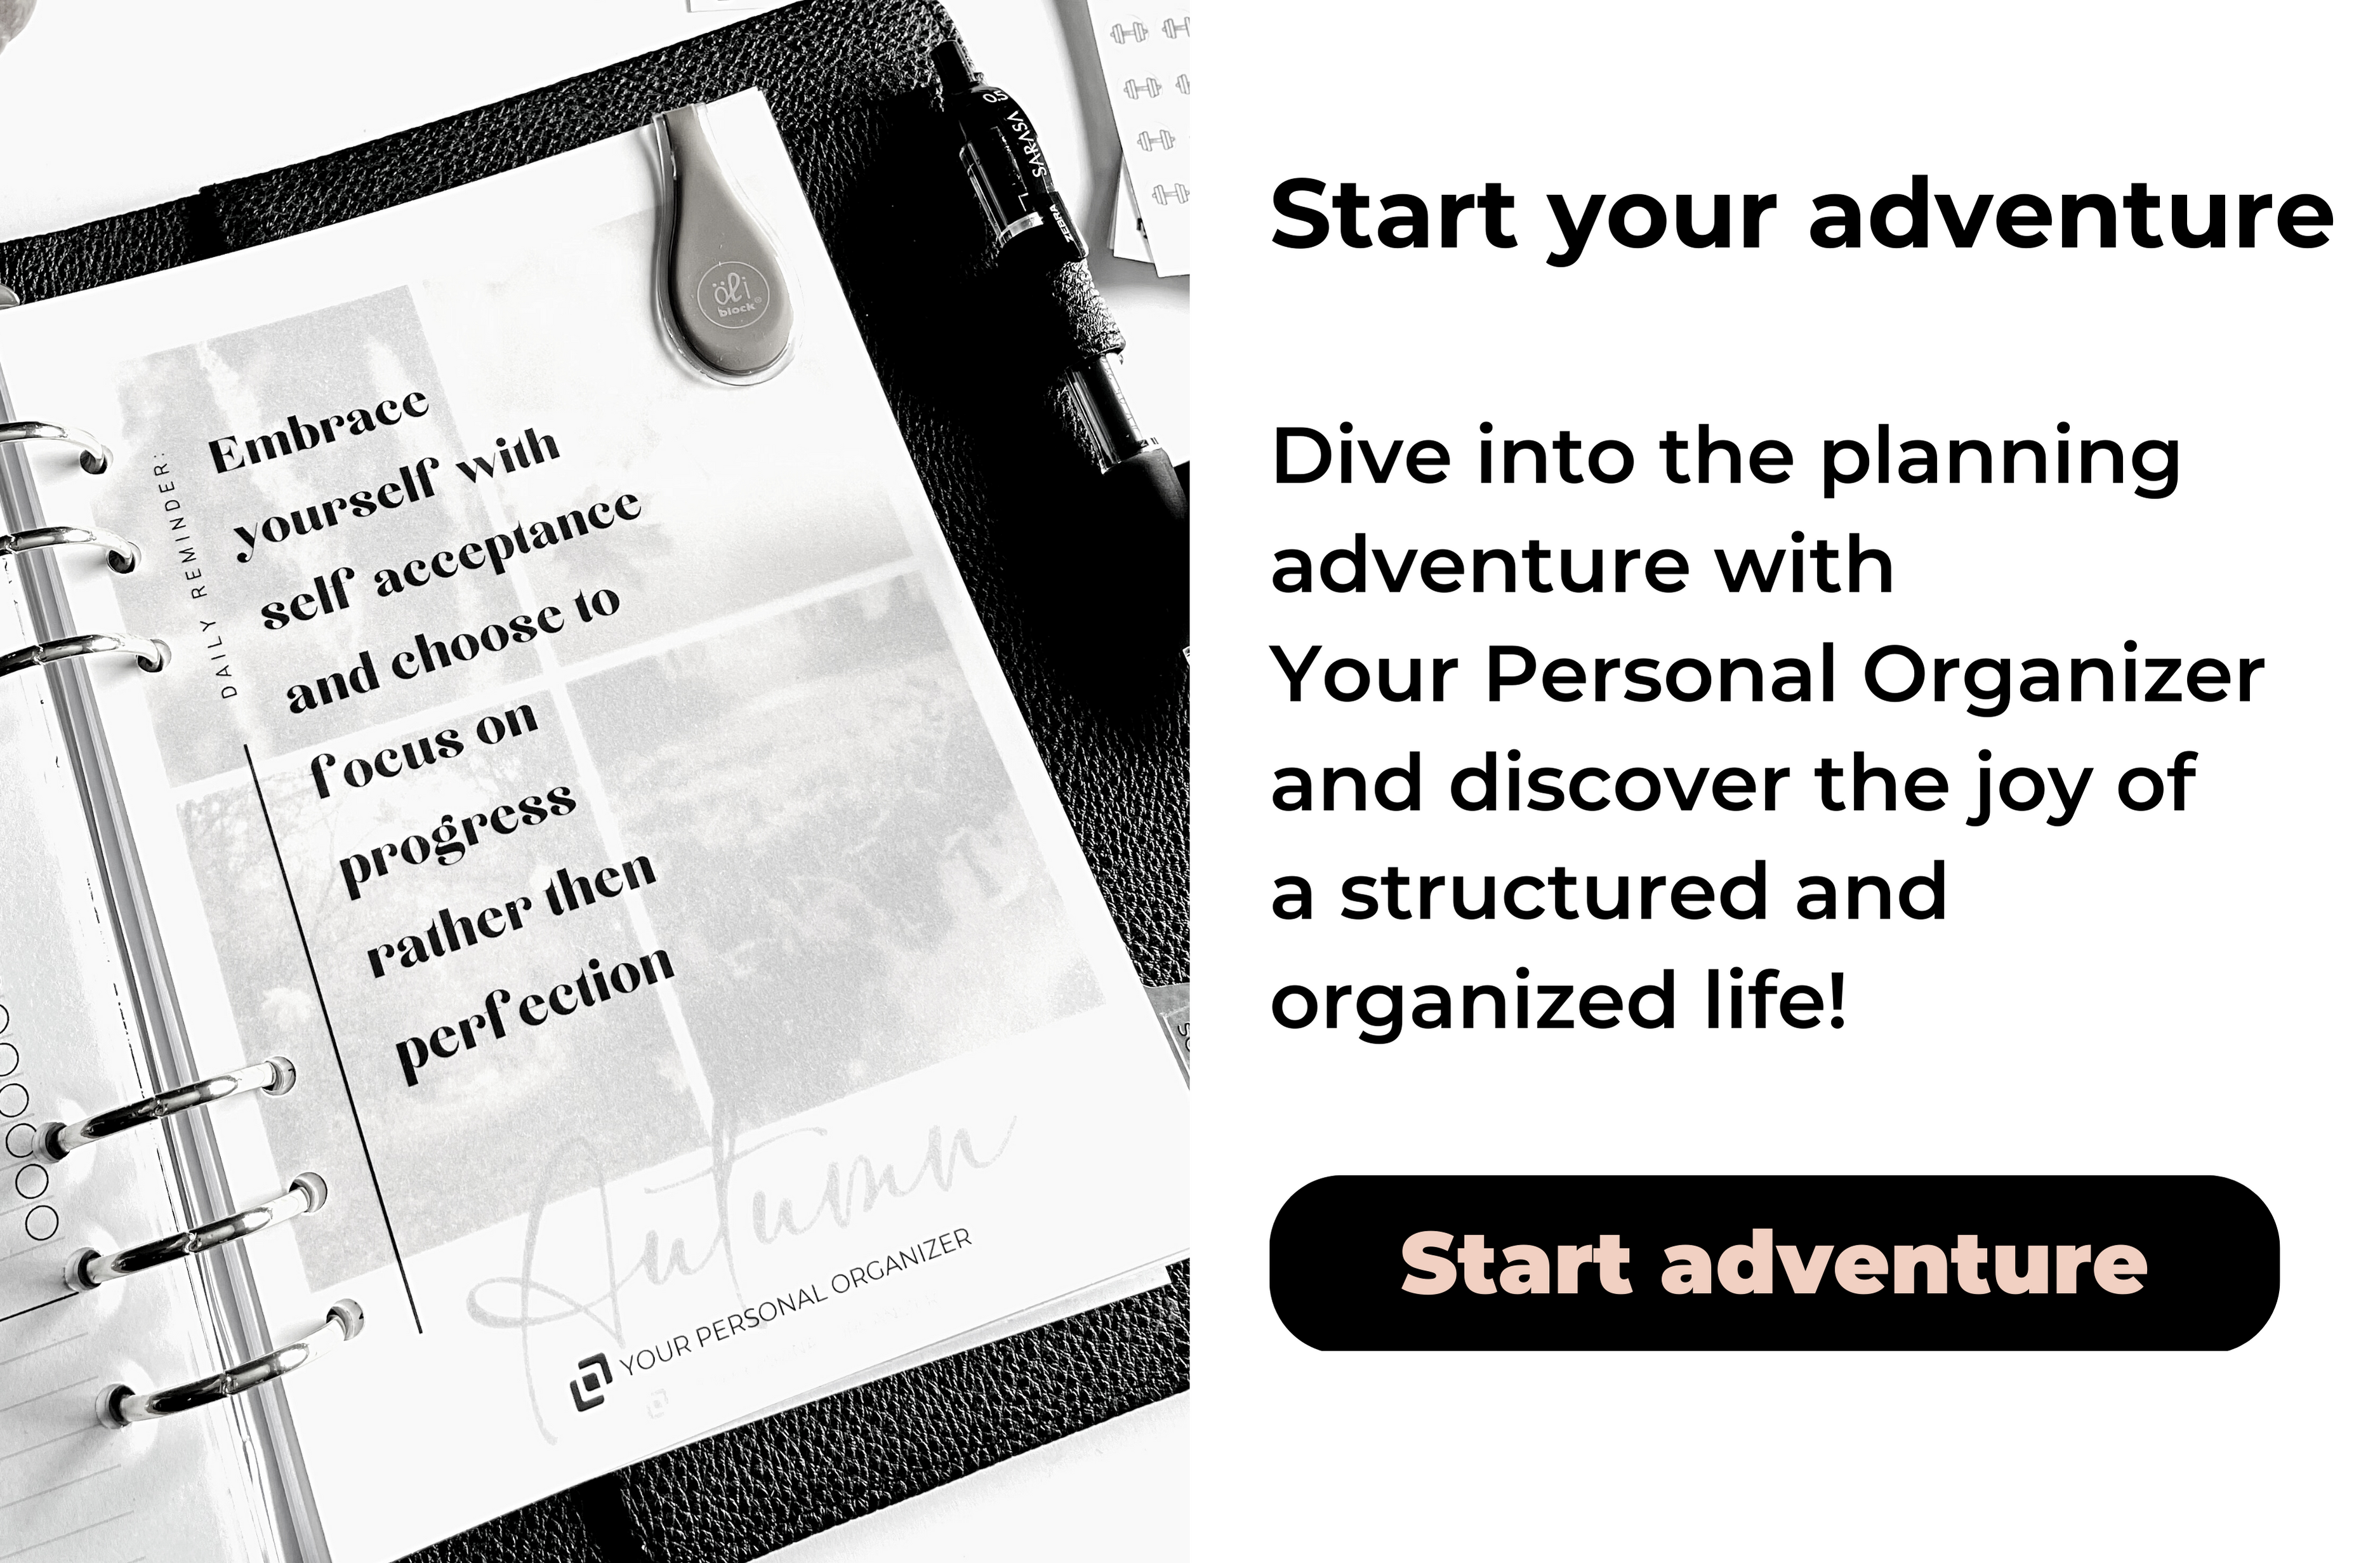 Discover Your Personal Organizer: Create Your Perfect Planner!